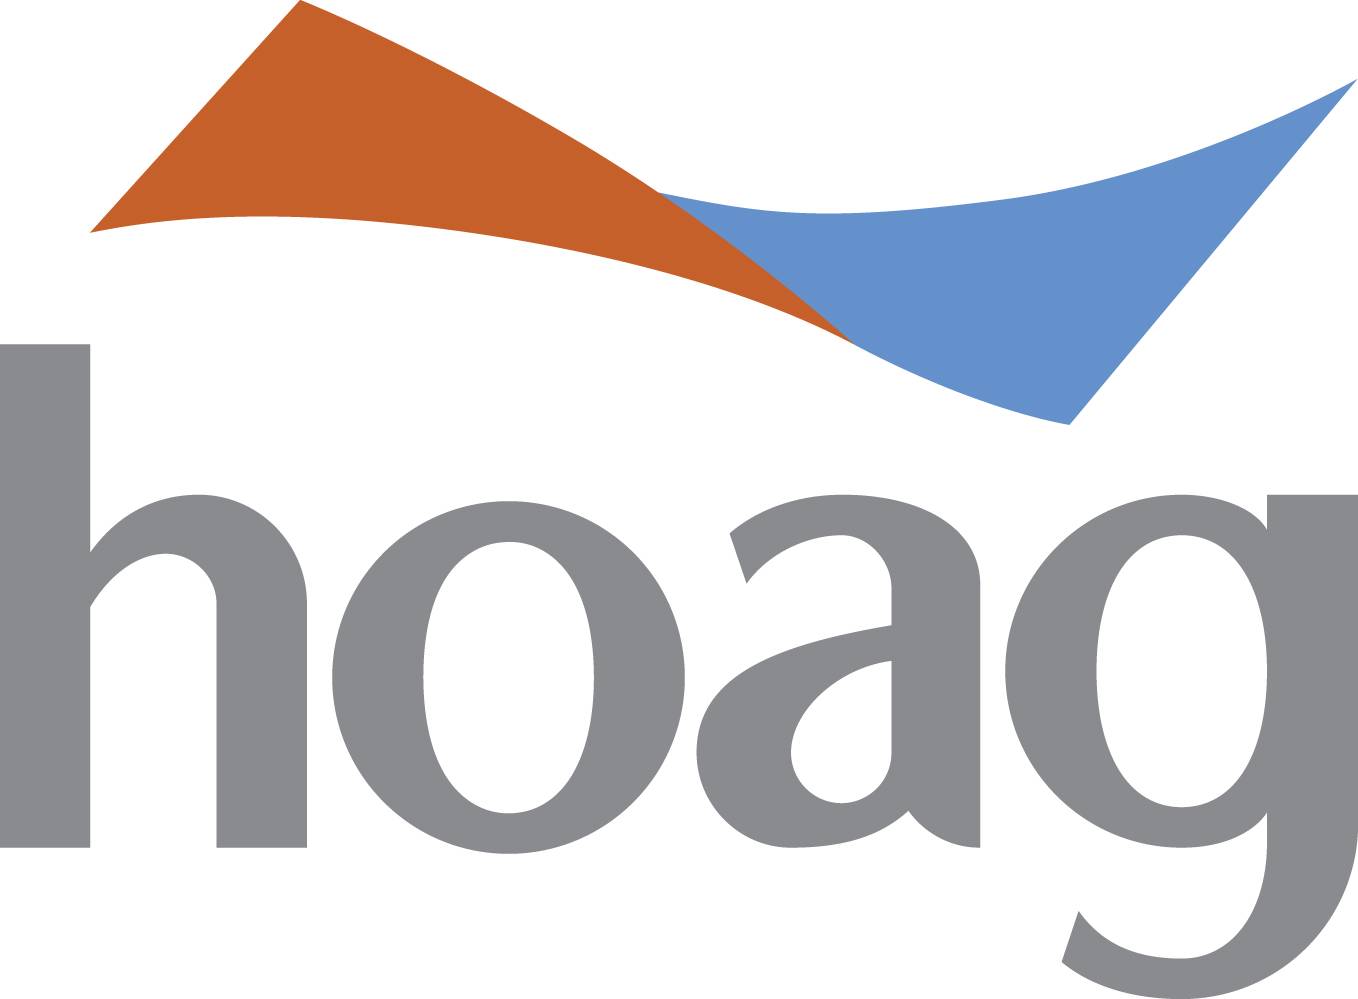 Hoag Personalized Cancer Therapy Virtual Event